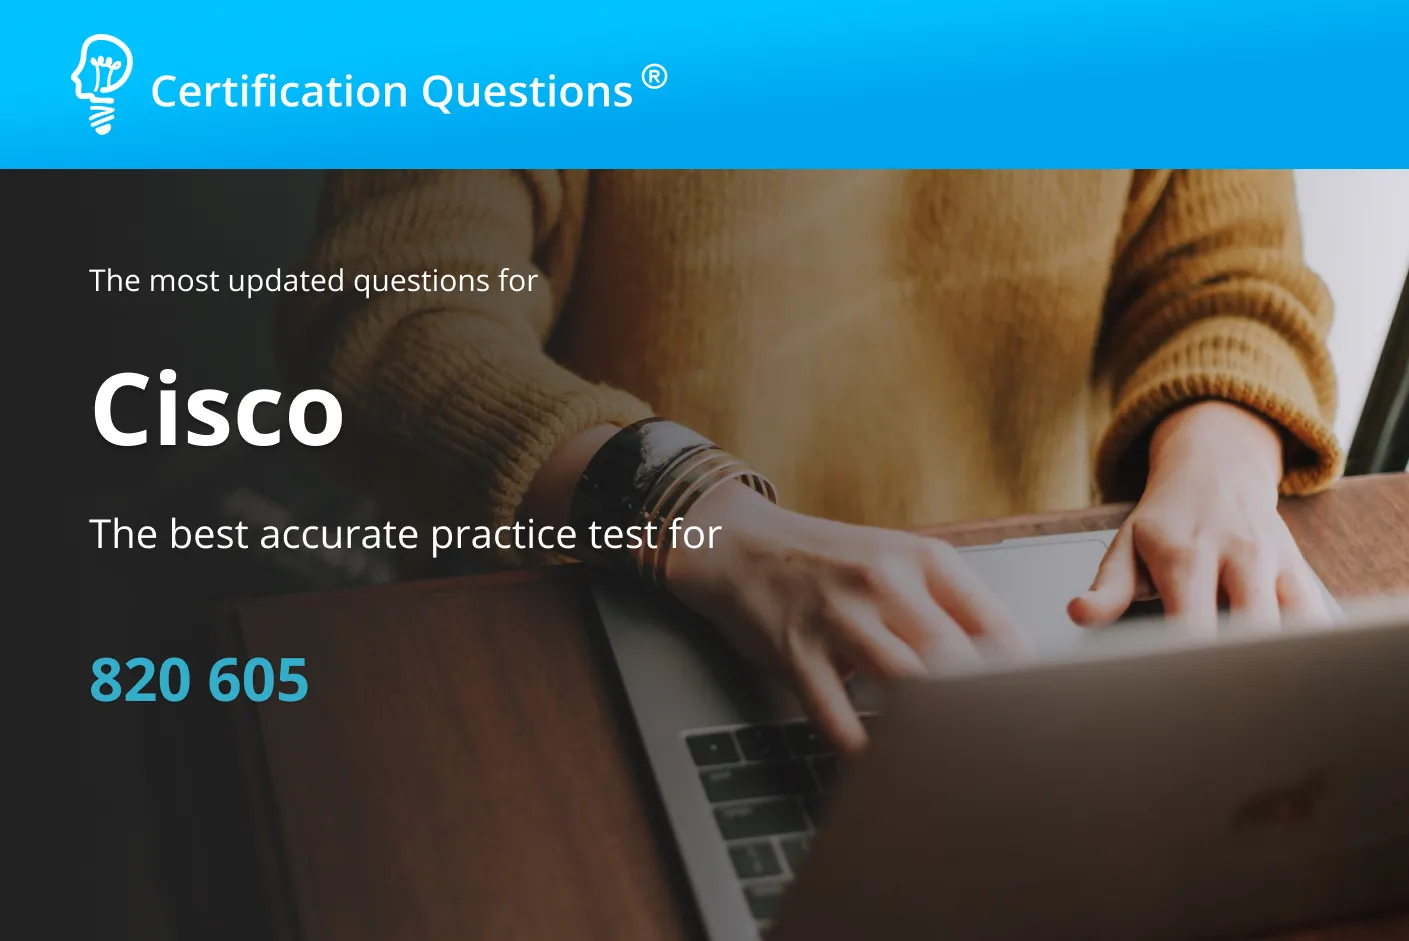 This image is related to the study guide of the CISCO 820-605 Practice Exam